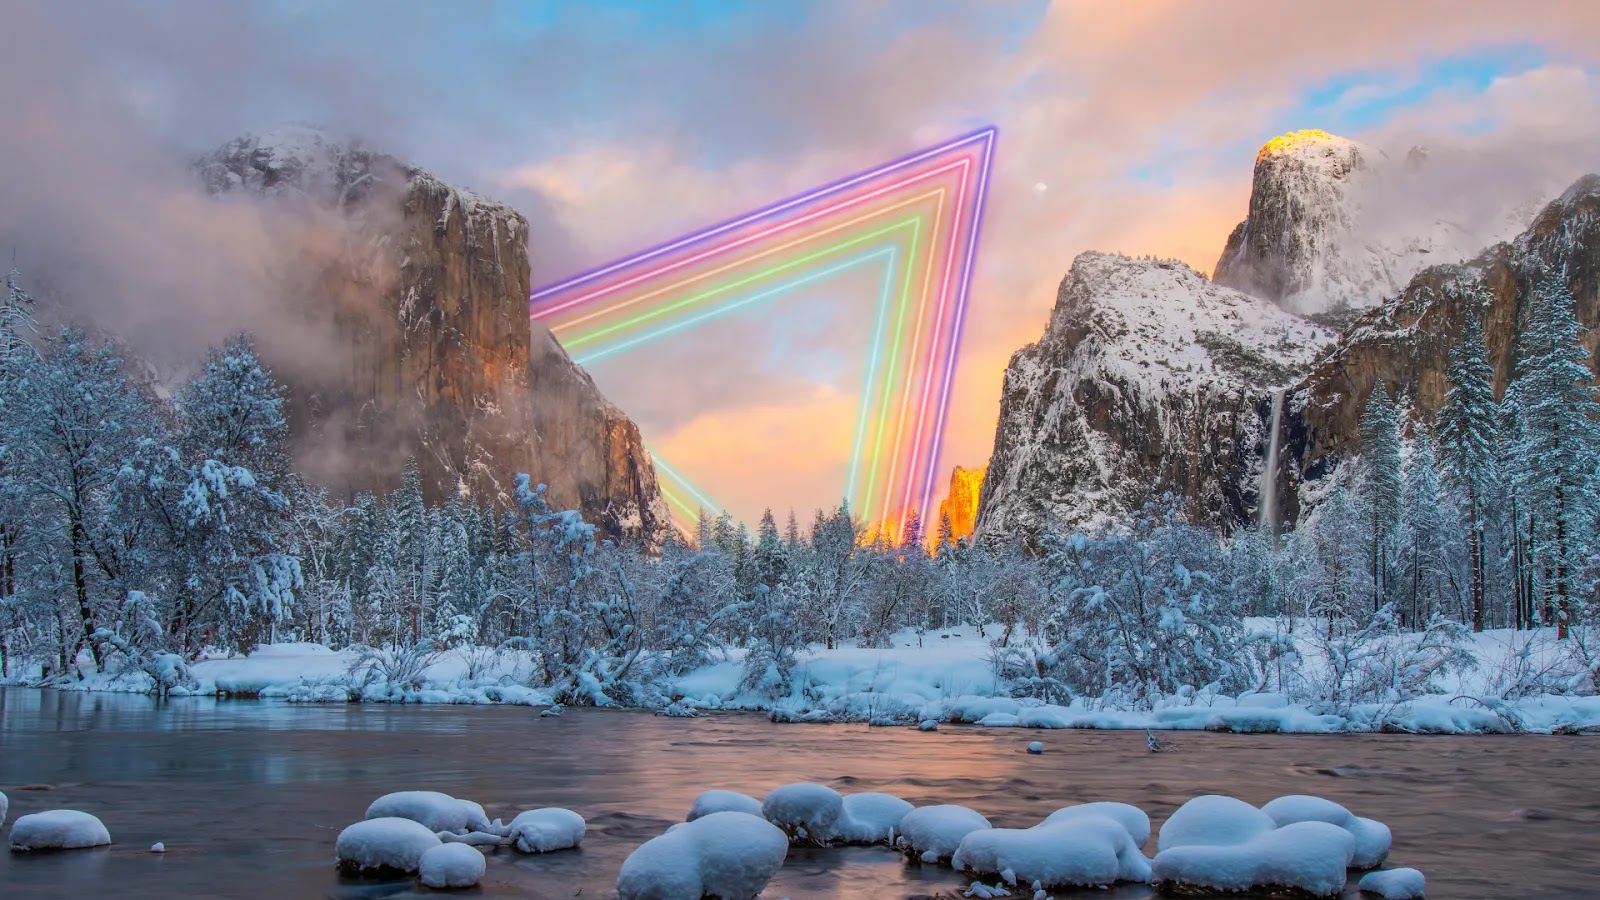 Wintry mountain landscape with a surreal, neon-lit triangular rainbow in the sky.